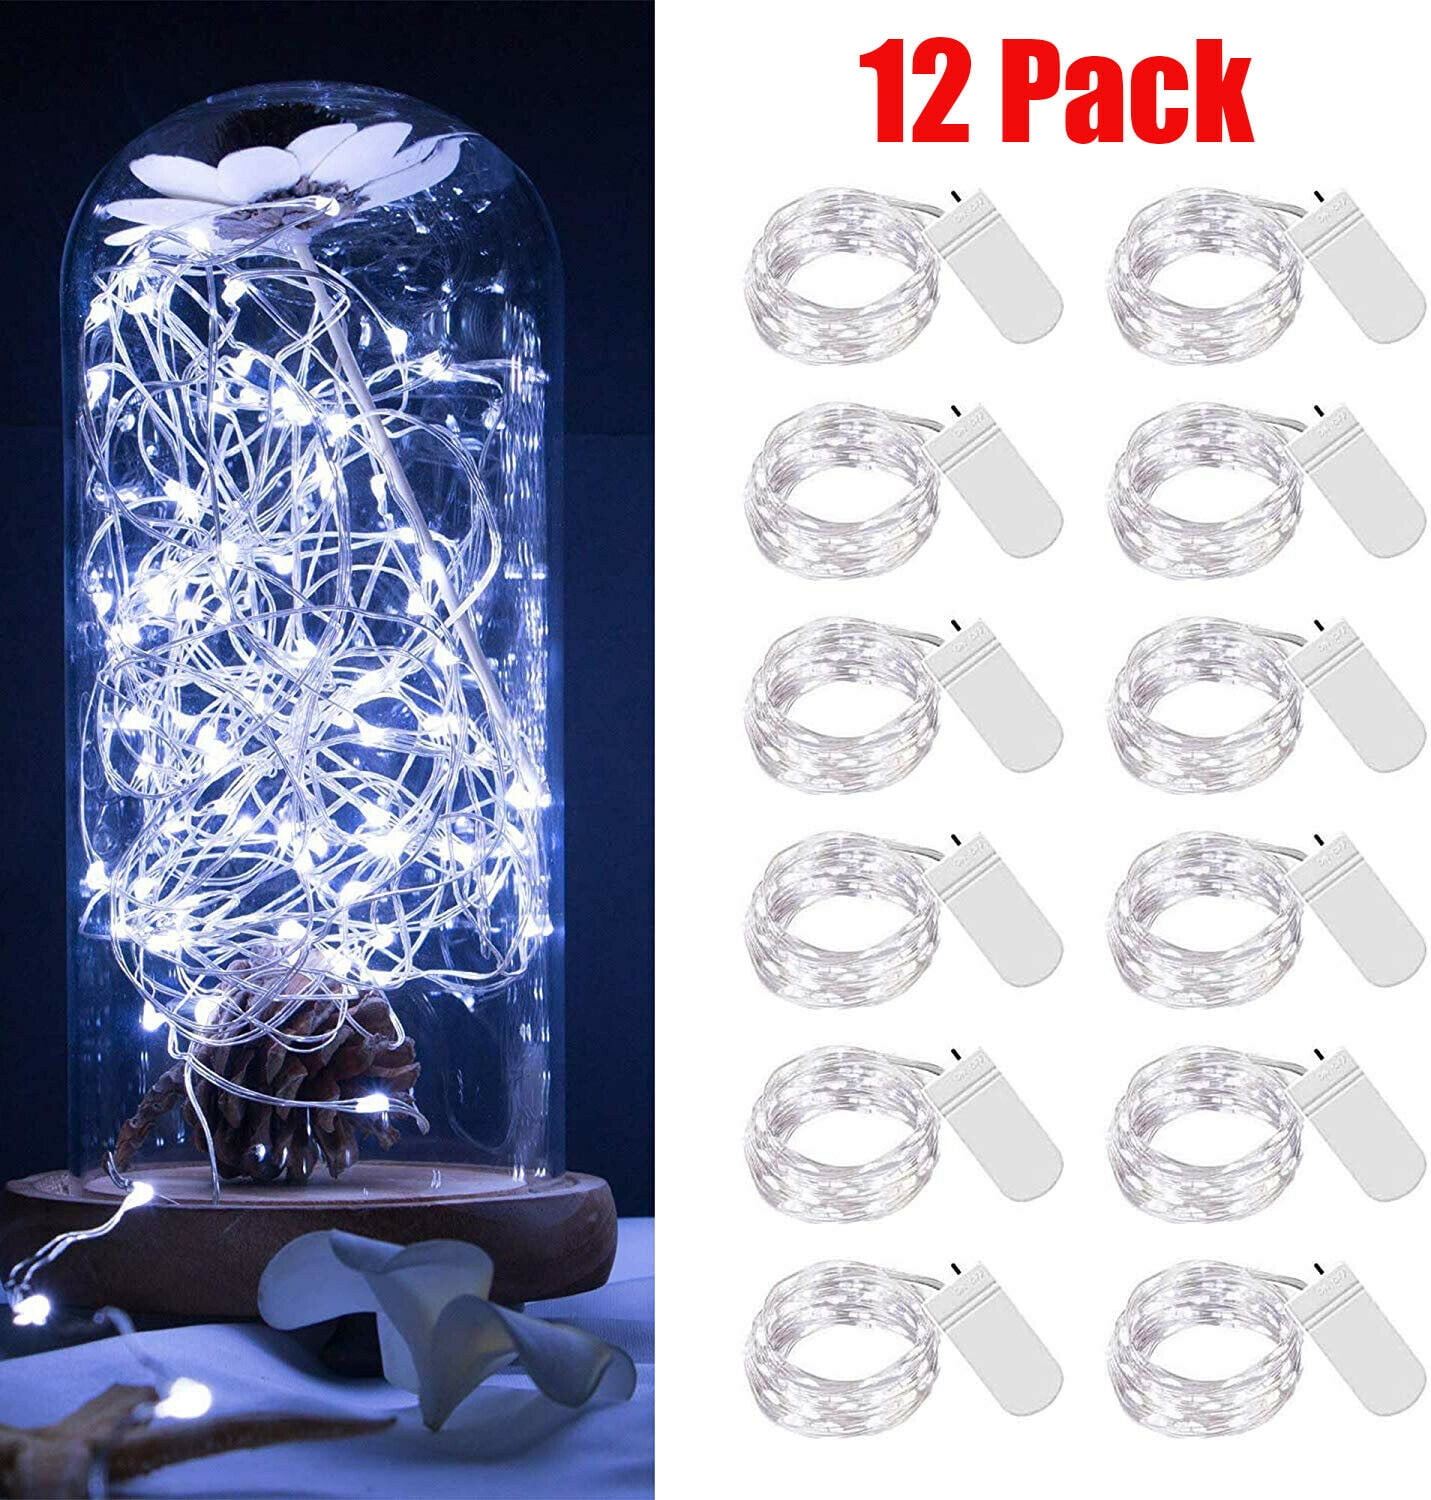 6 Pack 2M//6.6FT LED MICRO Silver Copper Wire String Fairy Lights Decoration